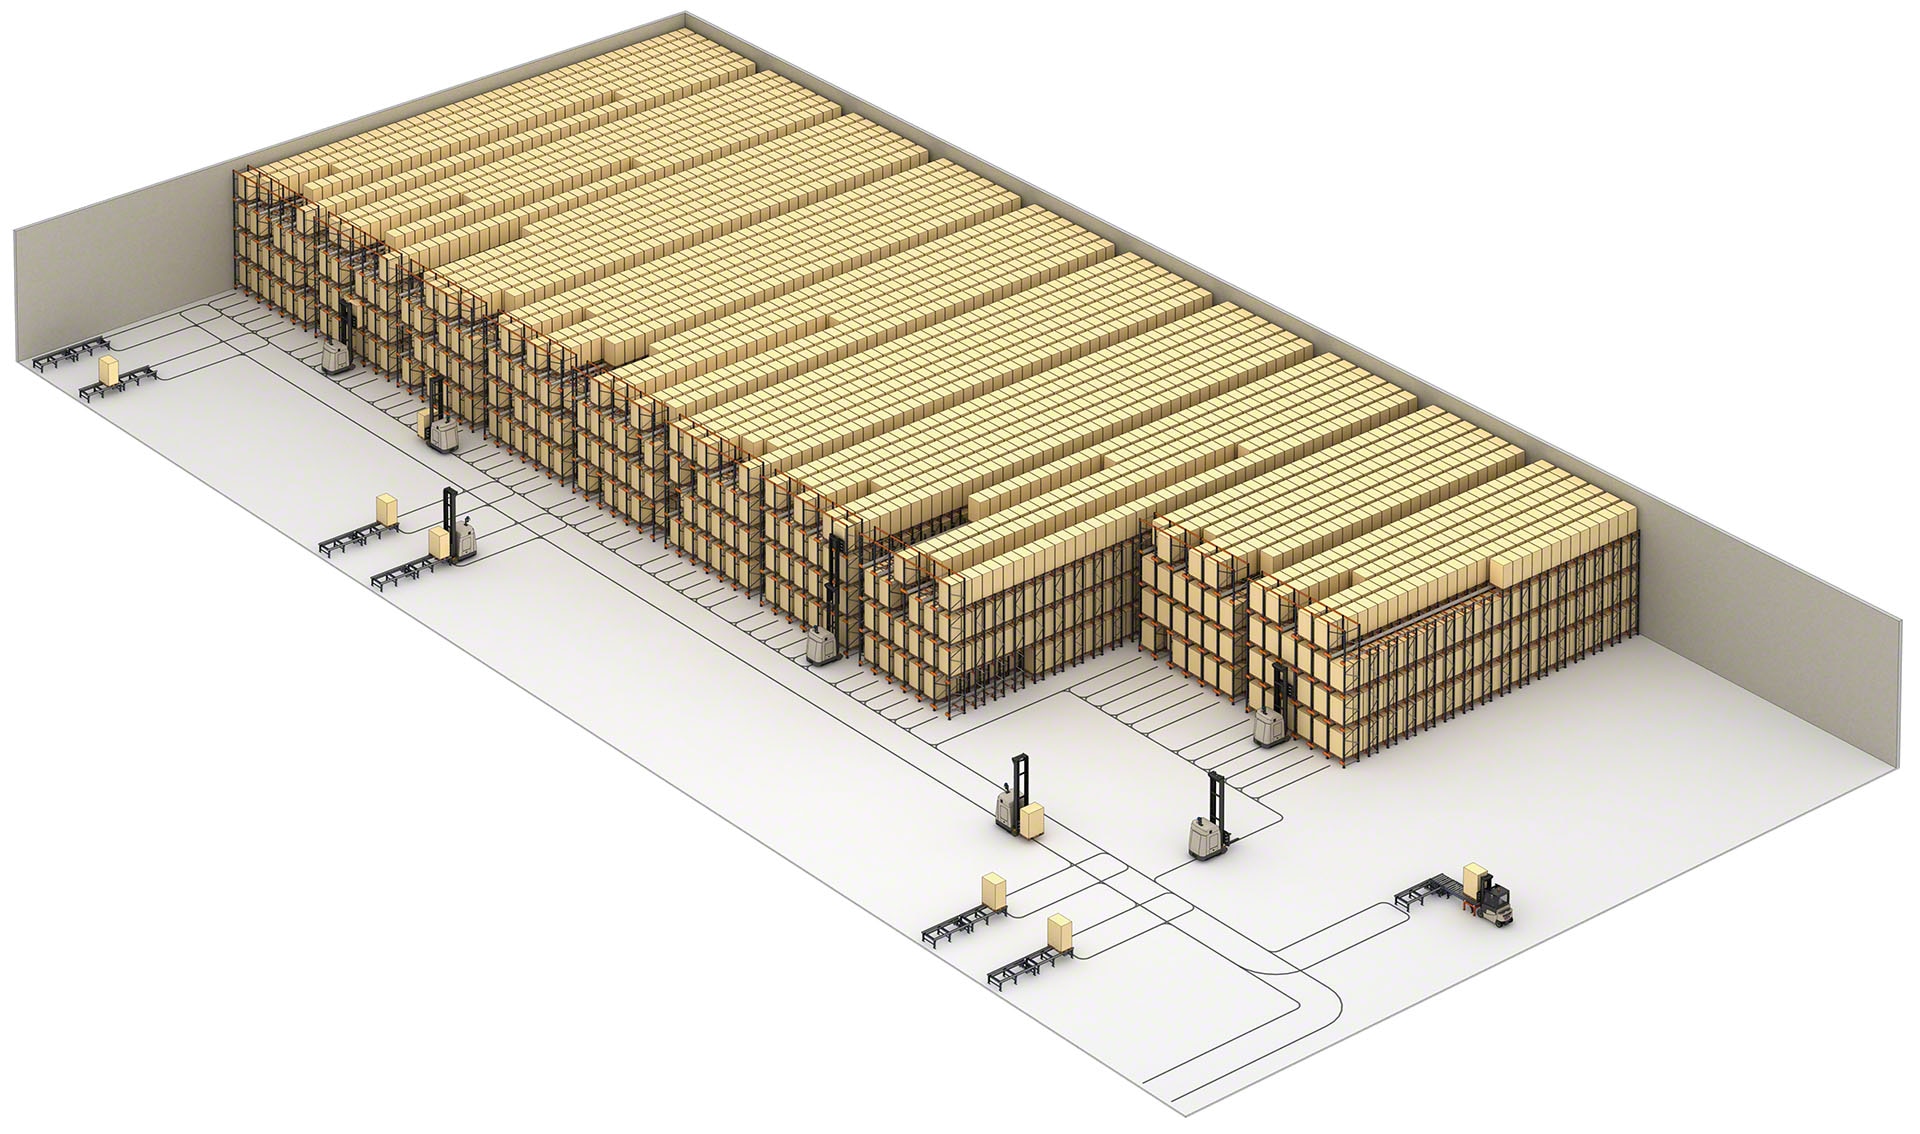 The Pallet Shuttle system can work with AGVs to fully automate a warehouse